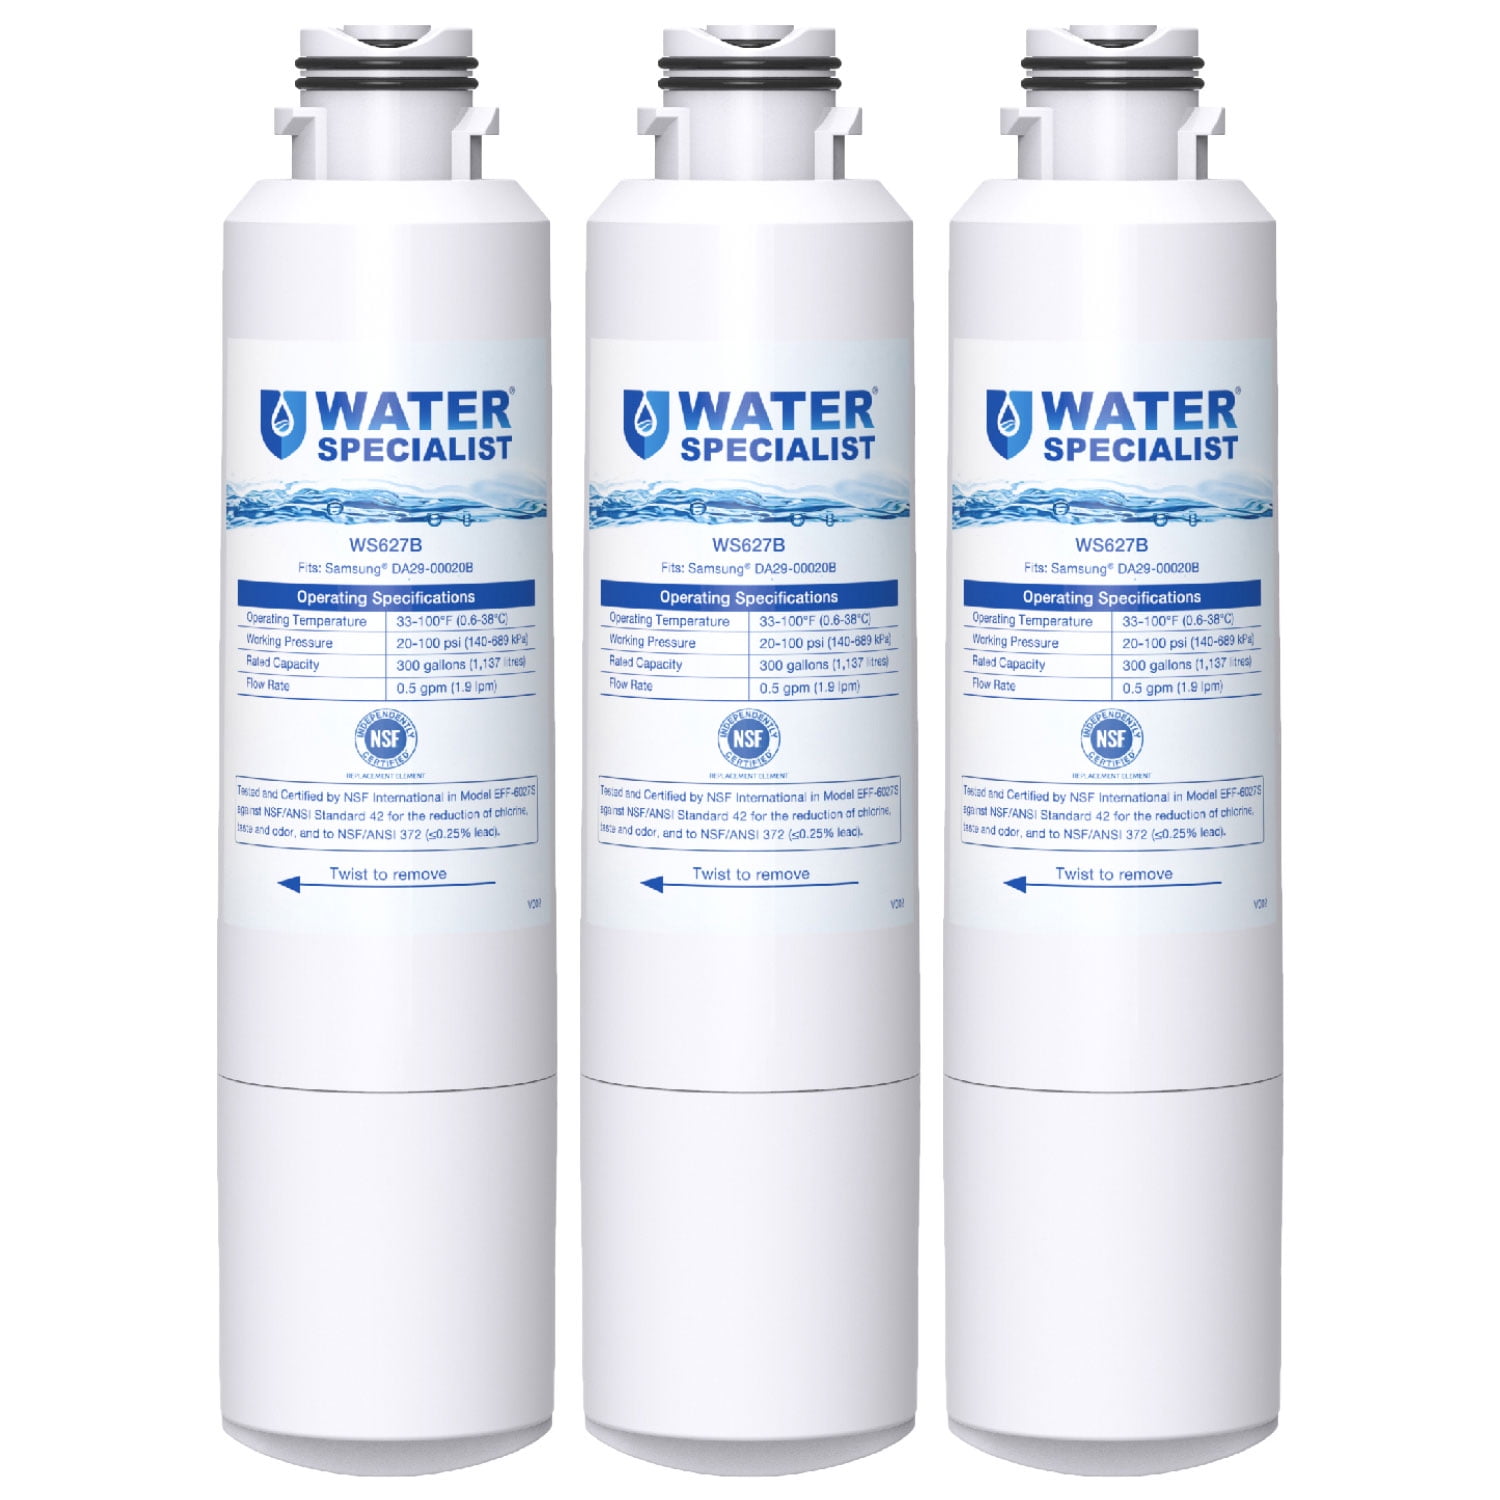 Waterspecialist DA29-00020B Refrigerator Water Filter Replacement for Samsung 